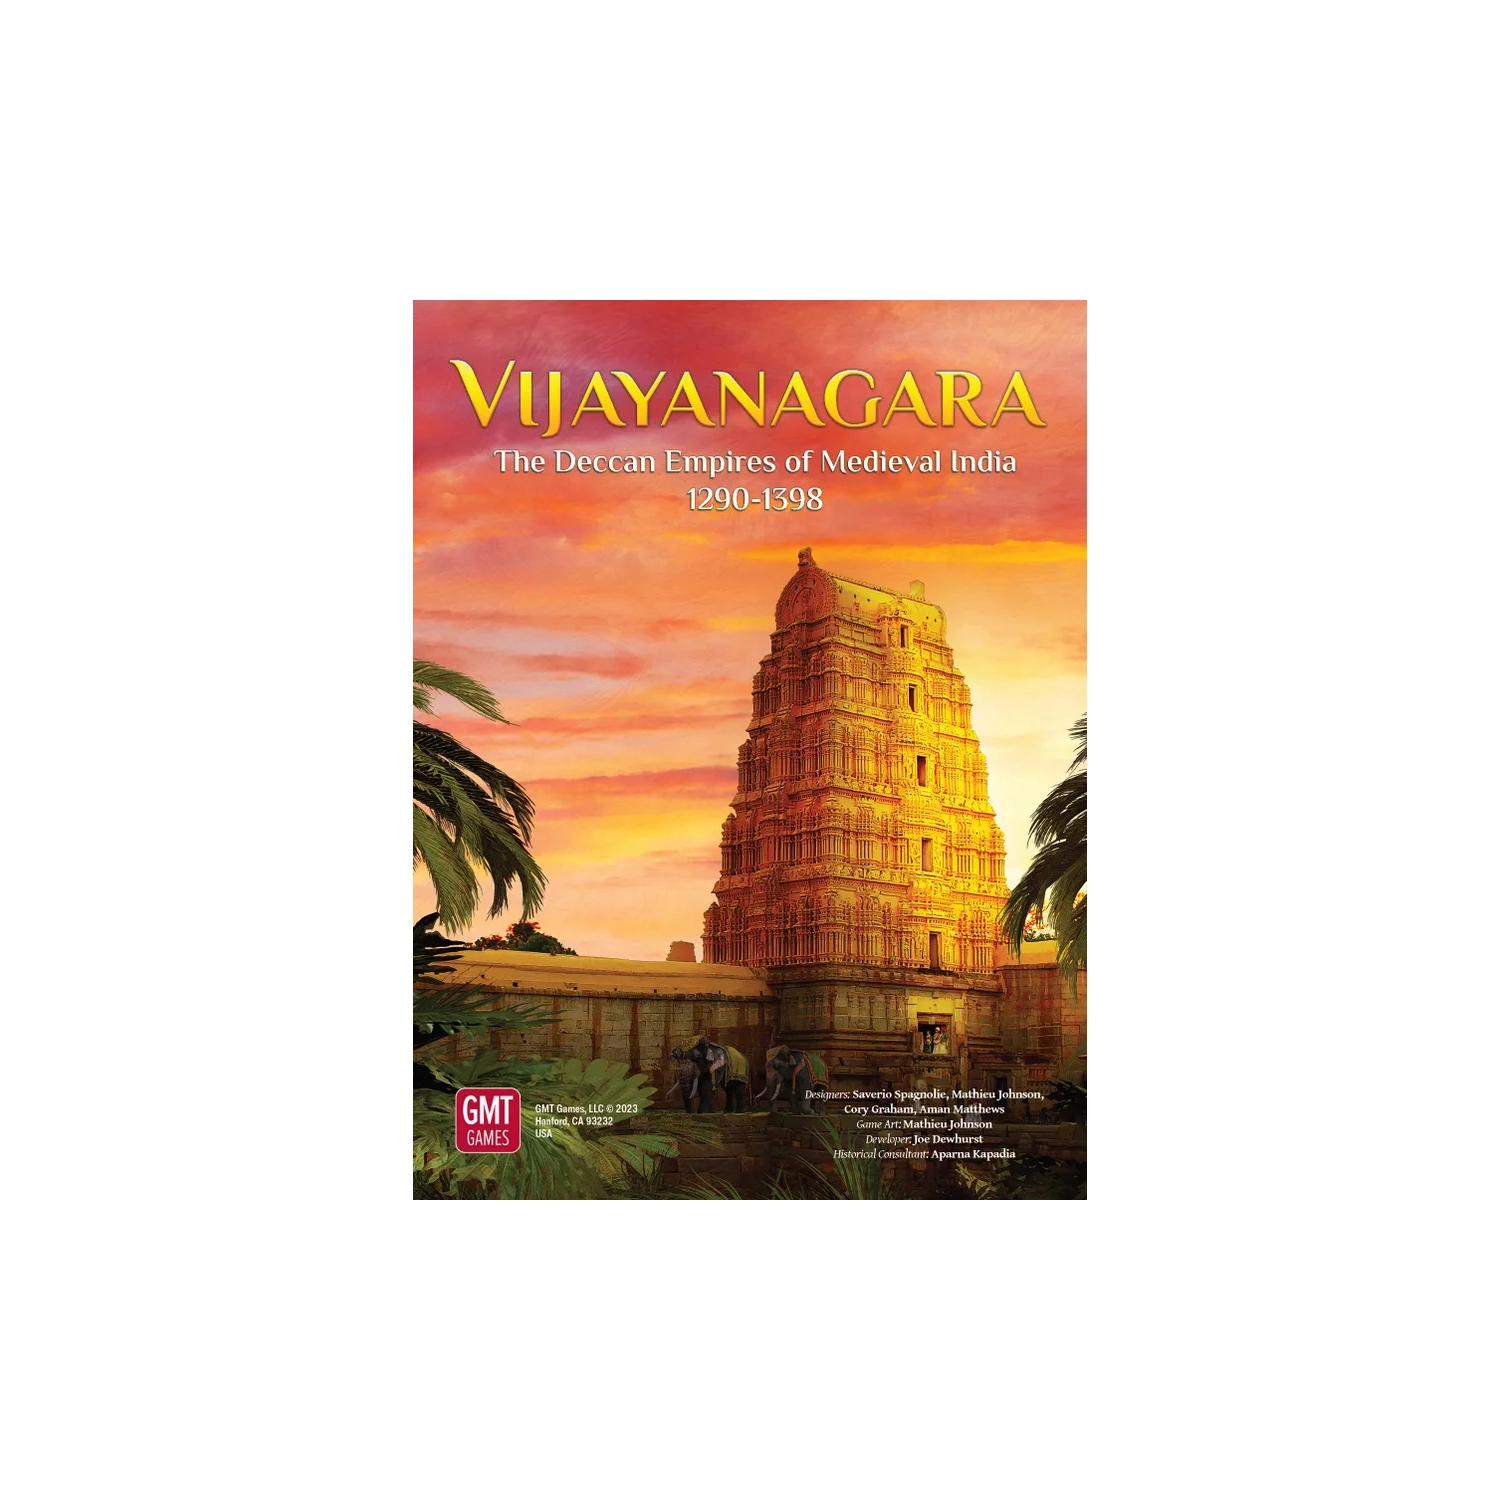 GMT Games Vijayanagara: The Deccan Empires of Medieval India, 1290-1398 1-3 players, 60-120 minutes, ages 13+